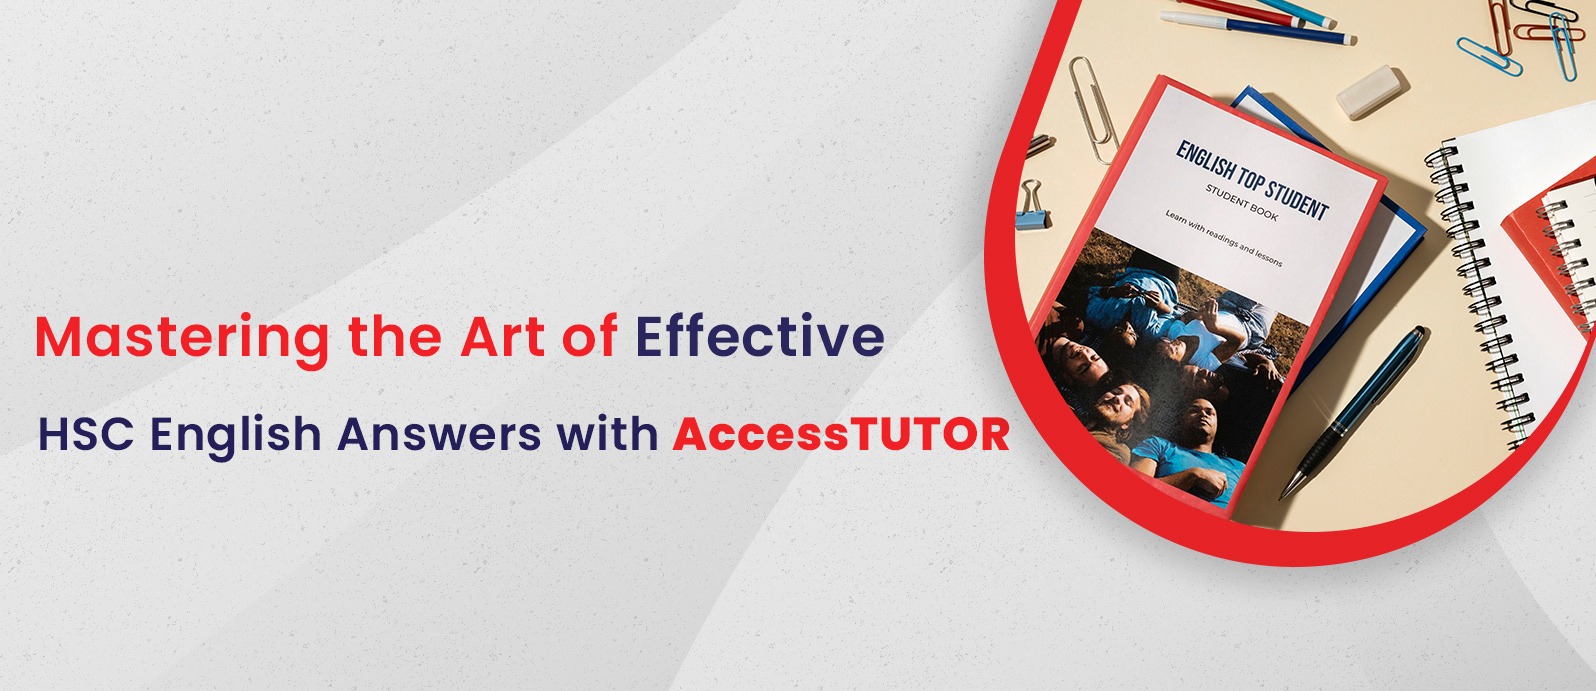 Mastering the Art of Effective HSC English Answers with AccessTUTOR